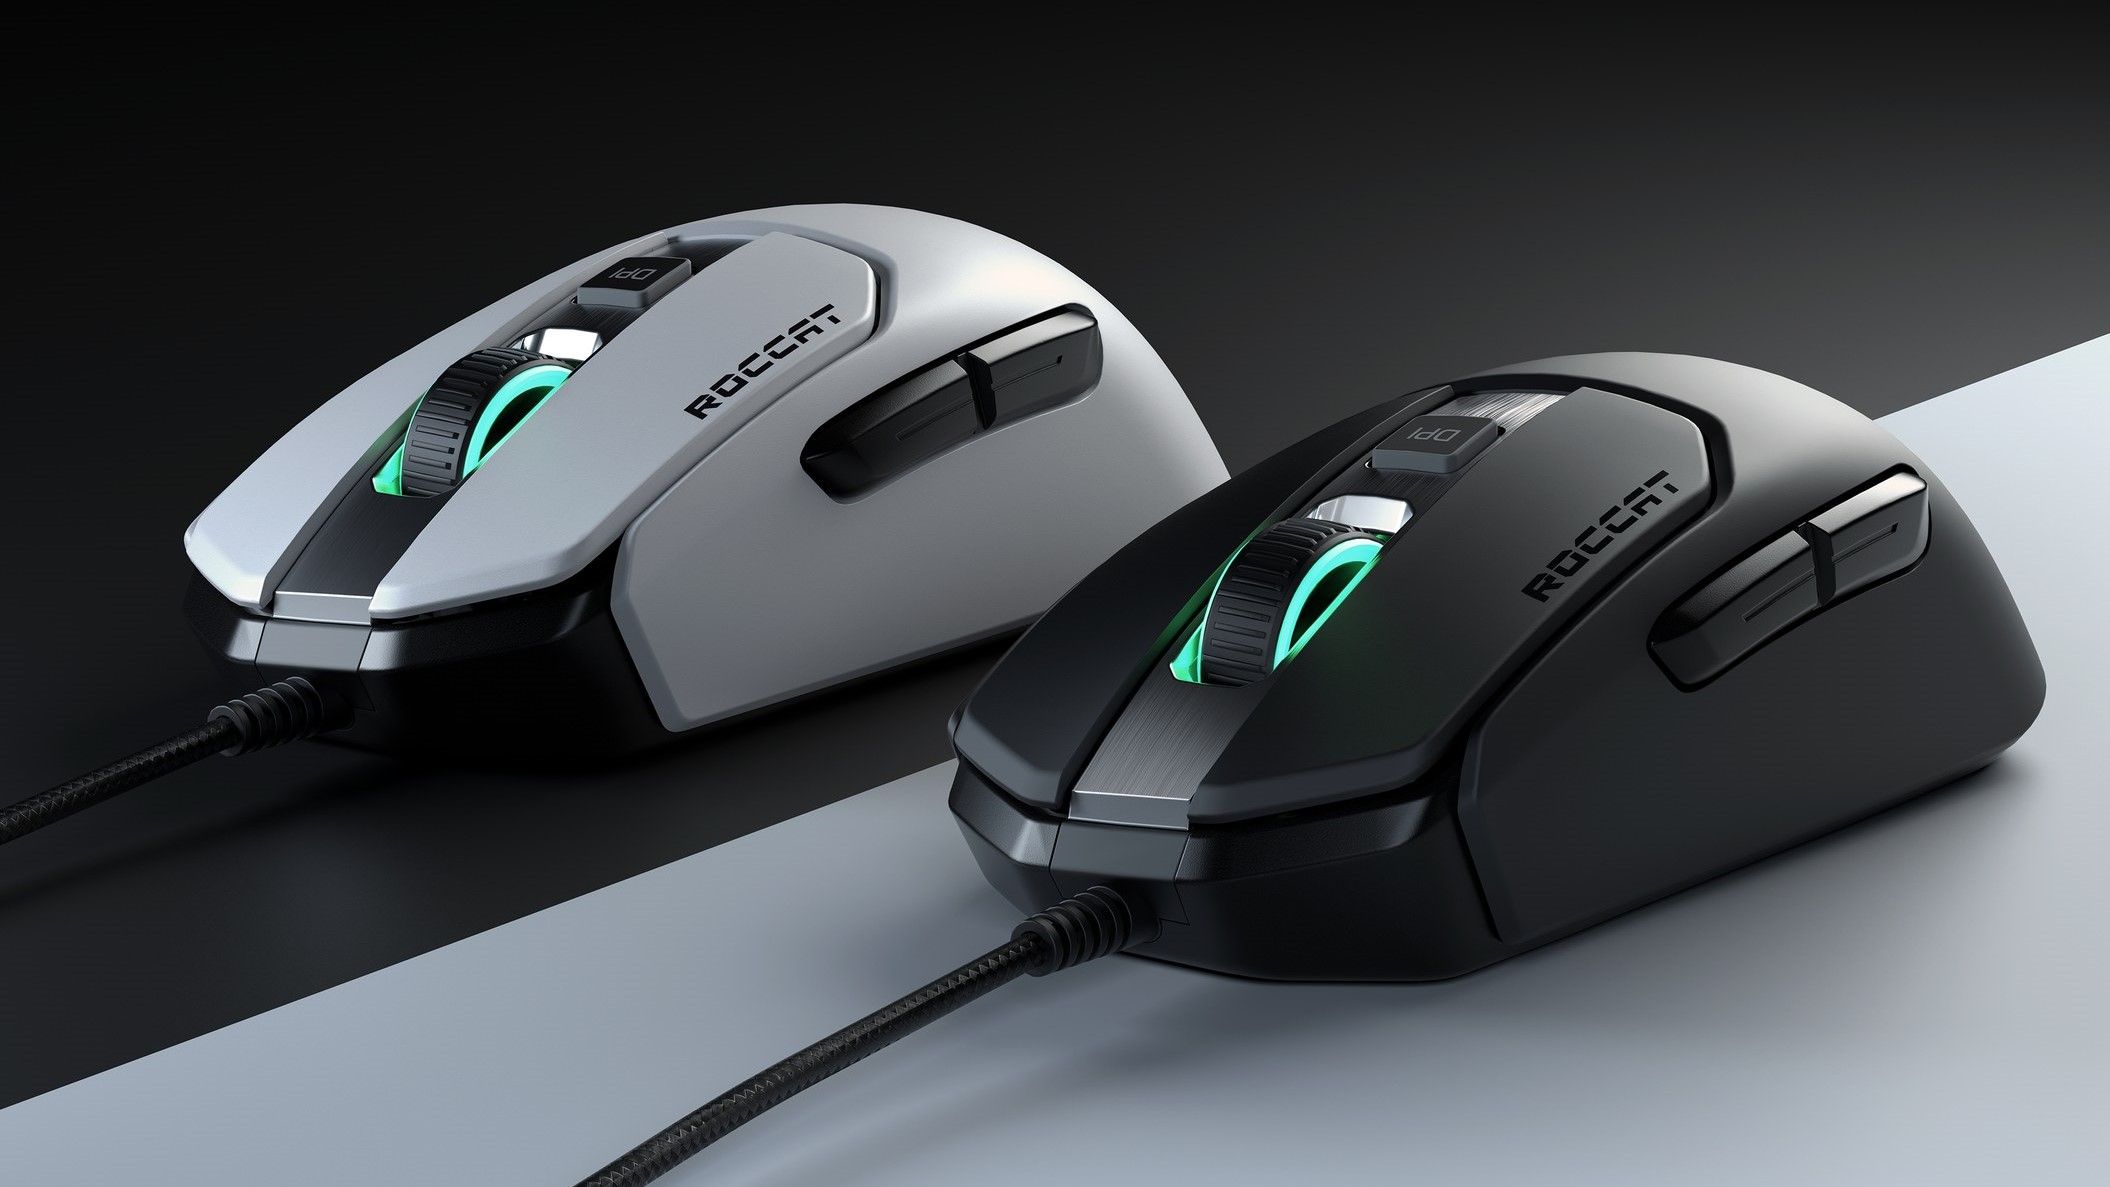 Best gaming mouse 2019 and best gaming mouse for PC gaming DPI polling buttons